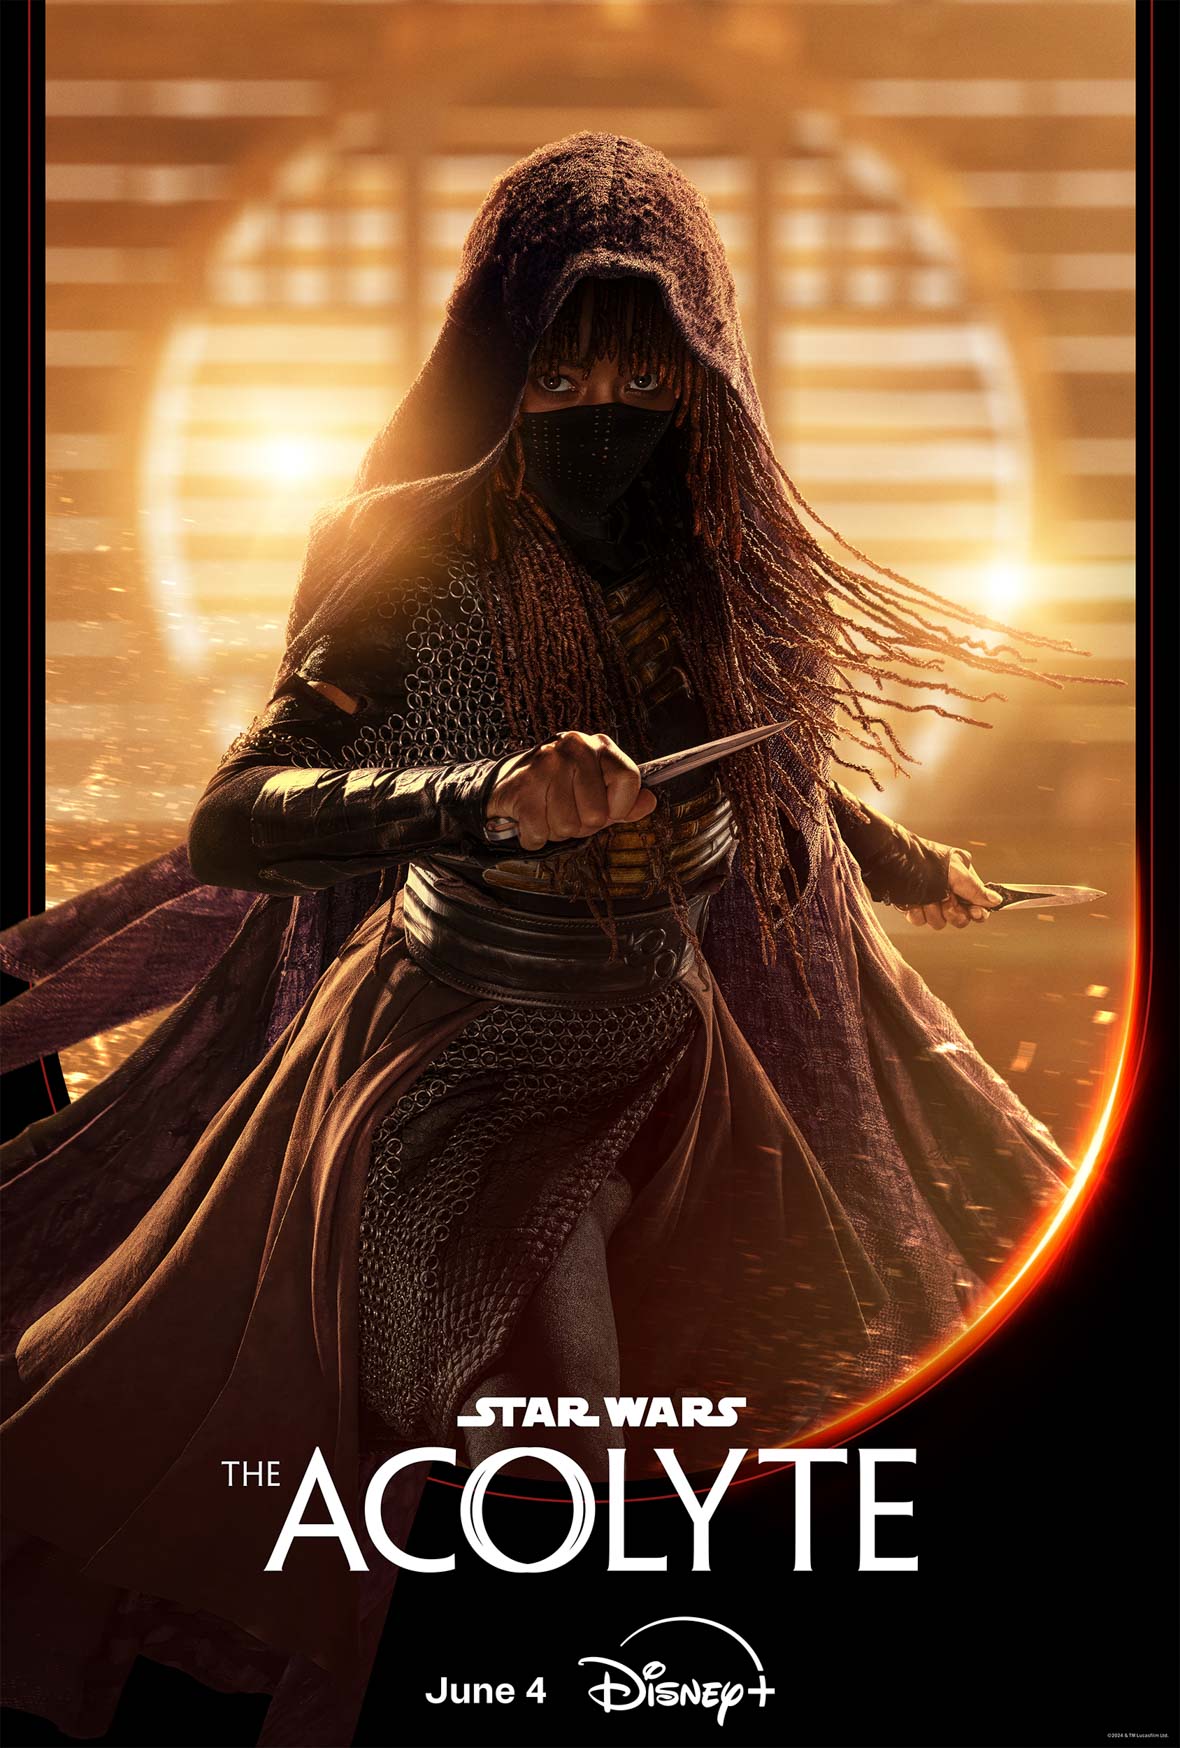 Mae—a woman in a cloak and black face mask—holds silver daggers in both hands, posed as though ready to strike an attacker. A black border frames the bottom of the image with the logo for Star Wars: The Acolyte written in white font.